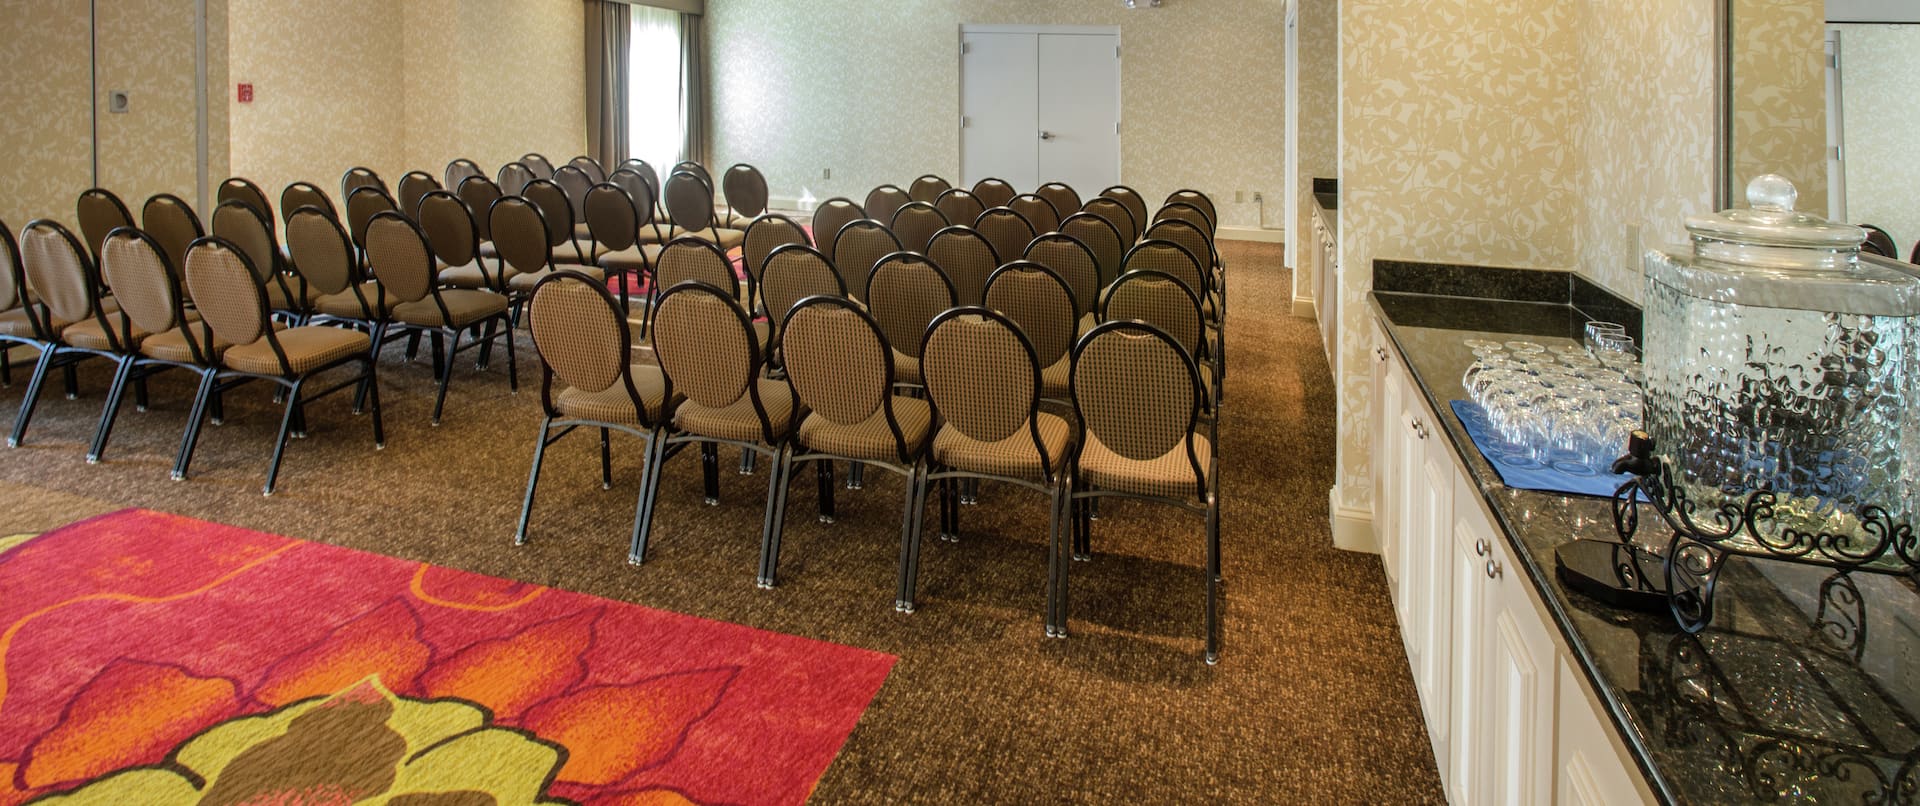 Meeting Room Theater Setup with Chairs